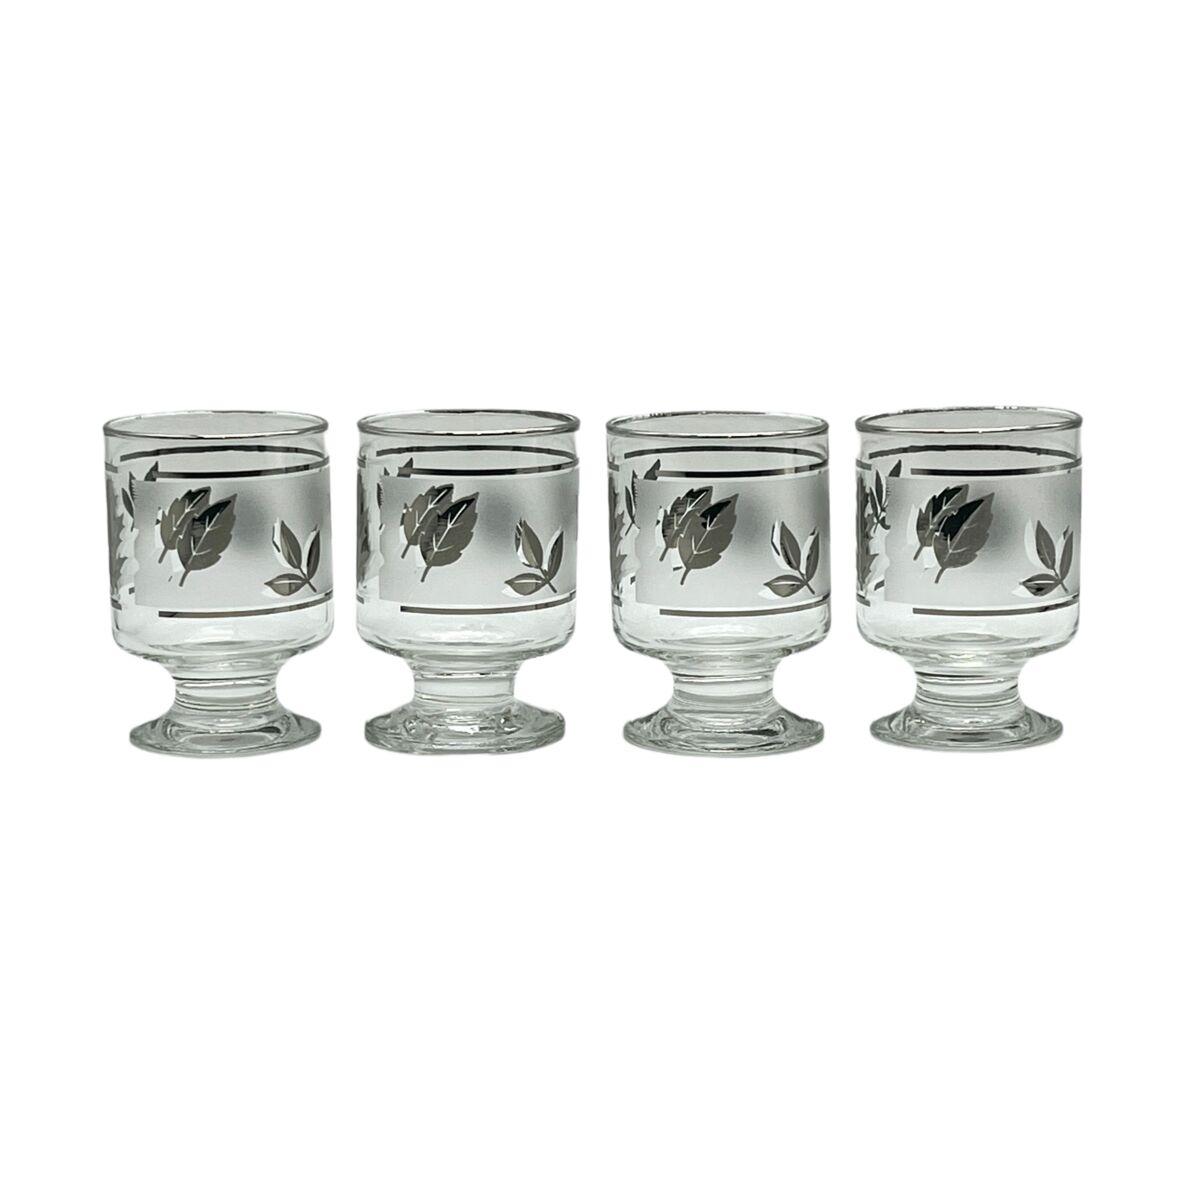 Vintage Libbey Silver Leaf Drinking Glasses Set of 4 Mixed Drinks